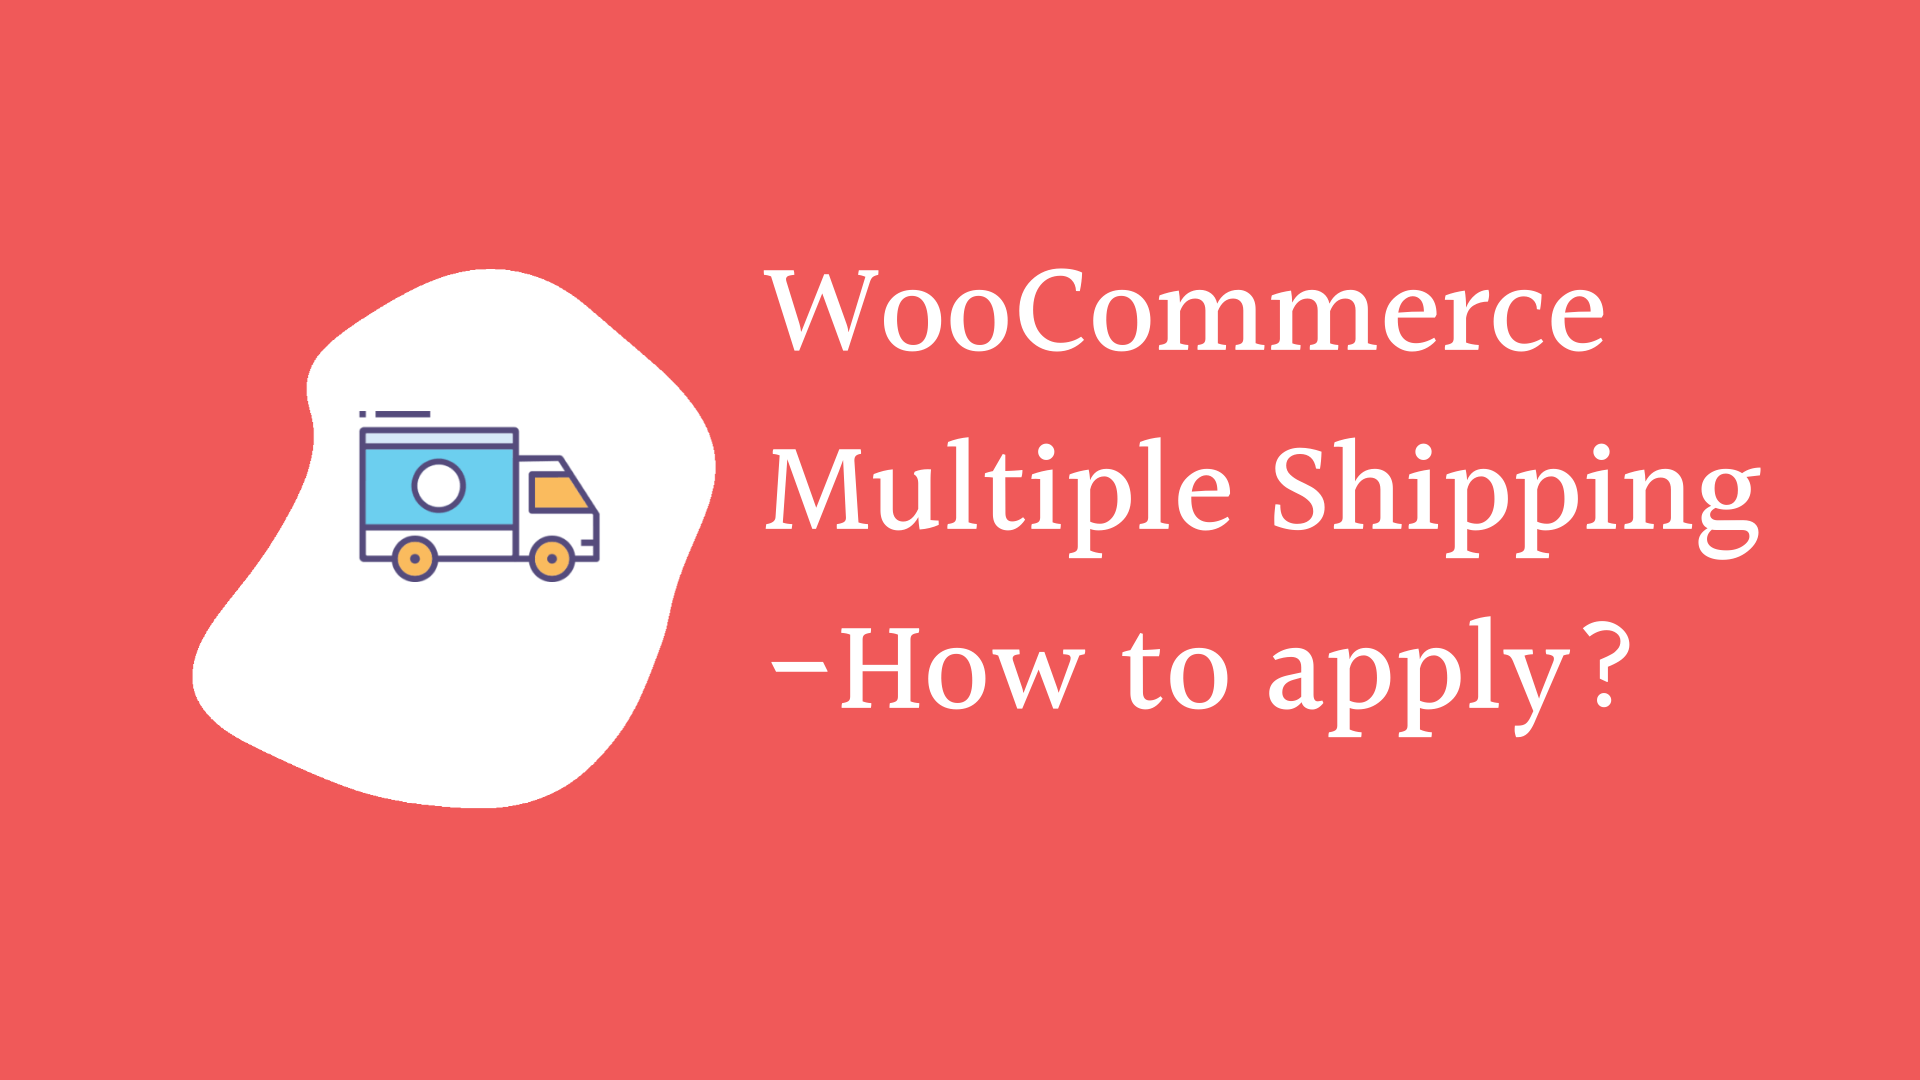 WooCommerce multiple shipping – How to apply?